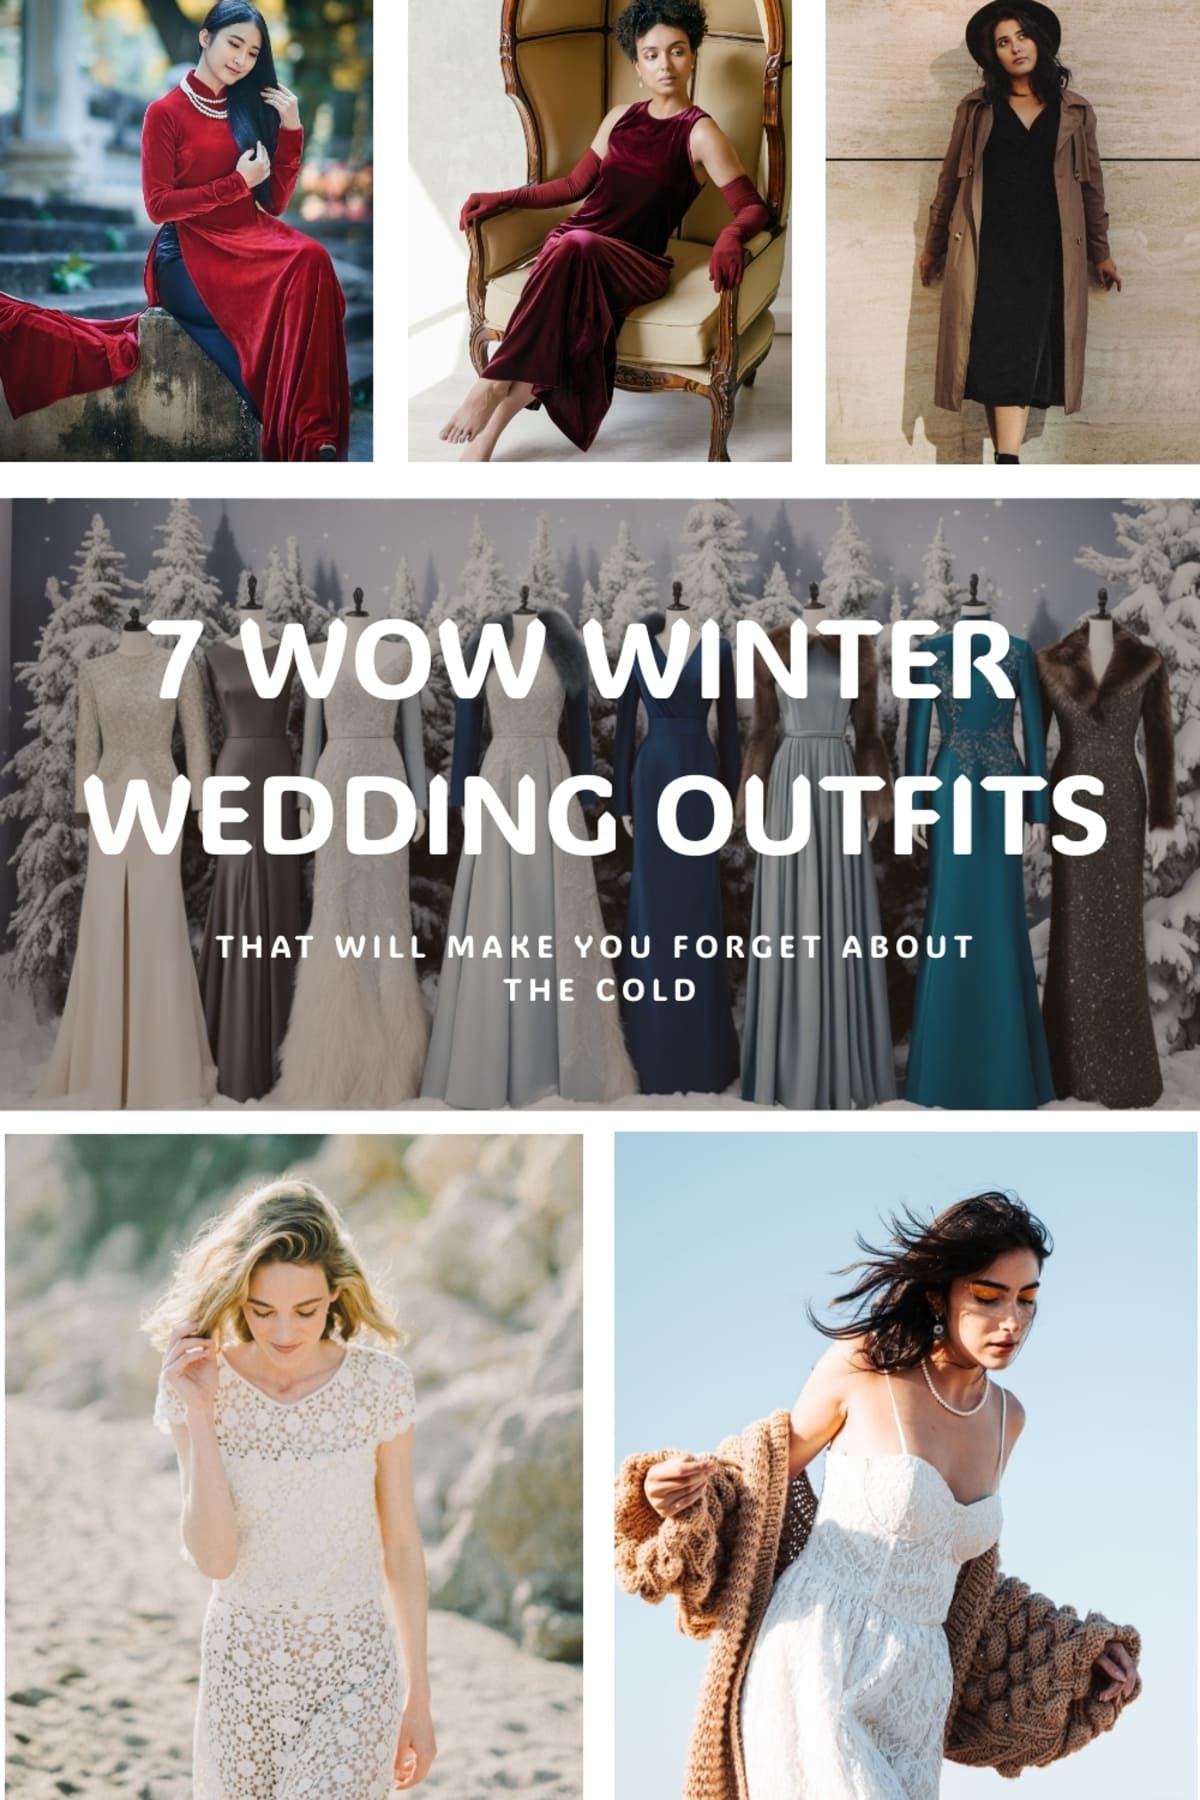 7 Wow Winter Wedding Outfits